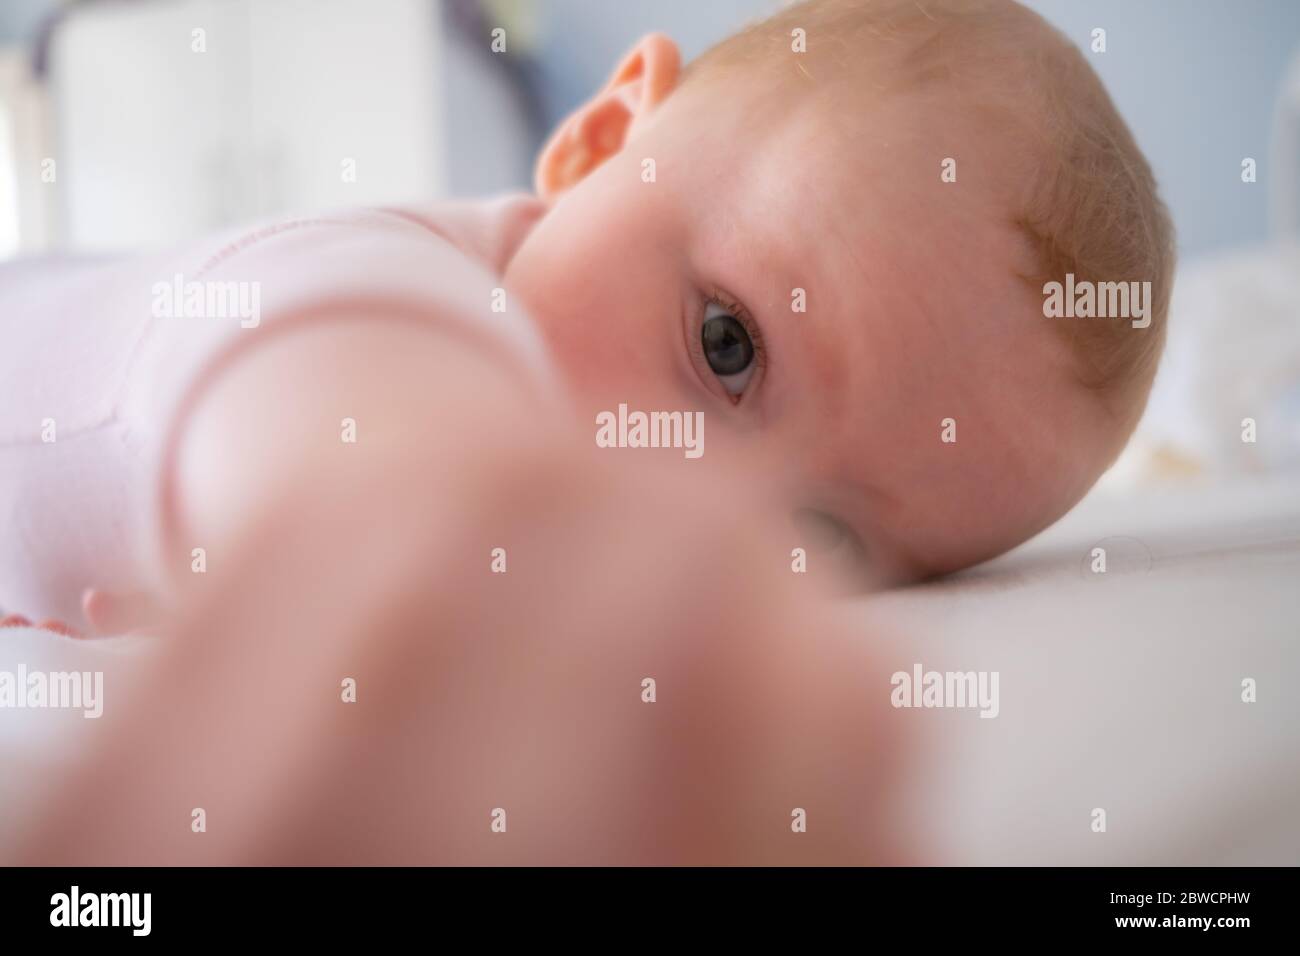 Cute baby girl standing on bed make funny faces, angry face, crying in the morning Stock Photo